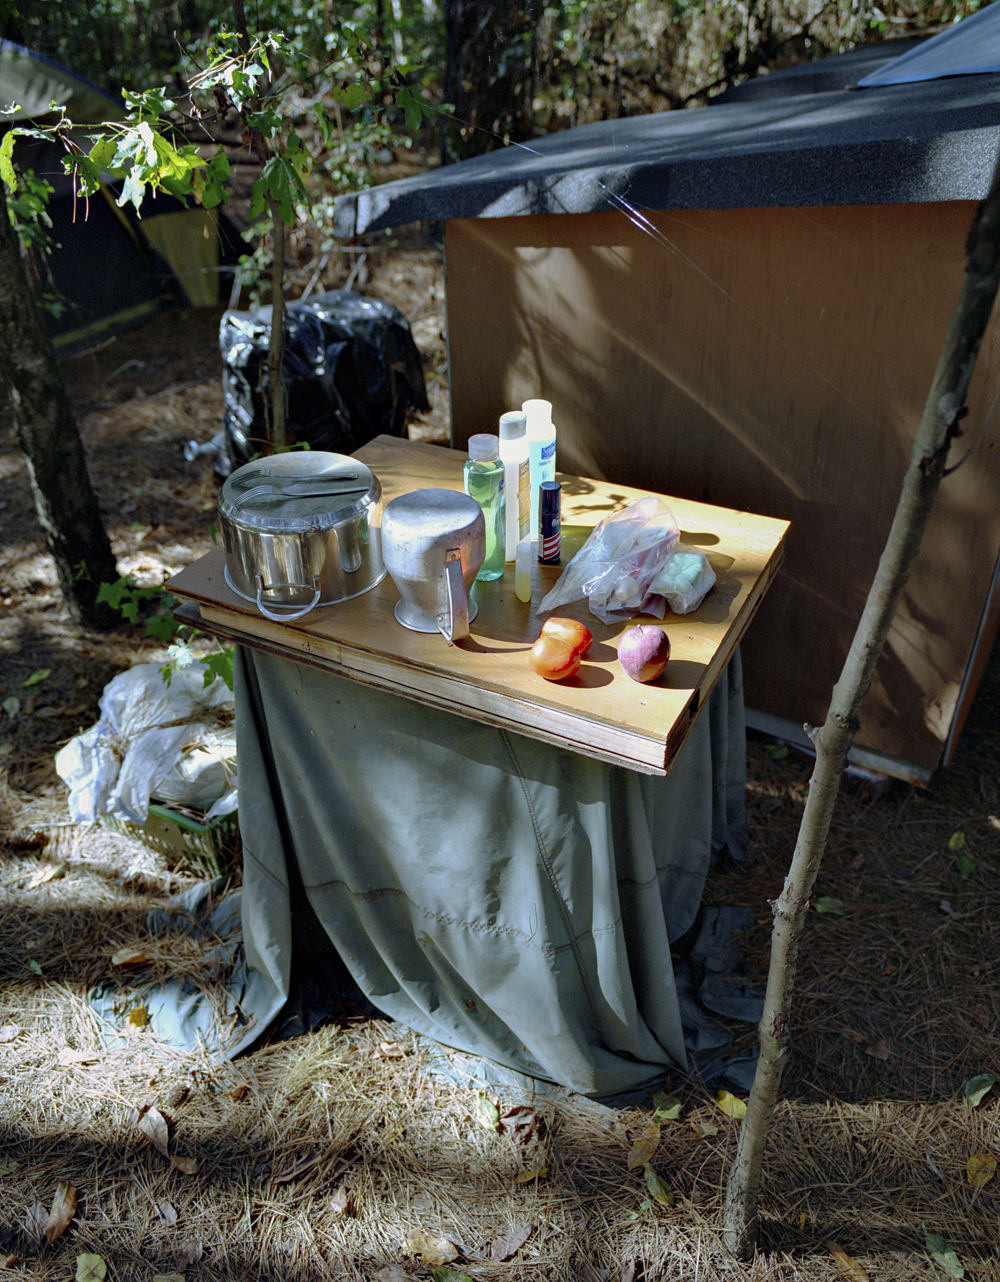 A makeshift table holds supplies and food, next to tents